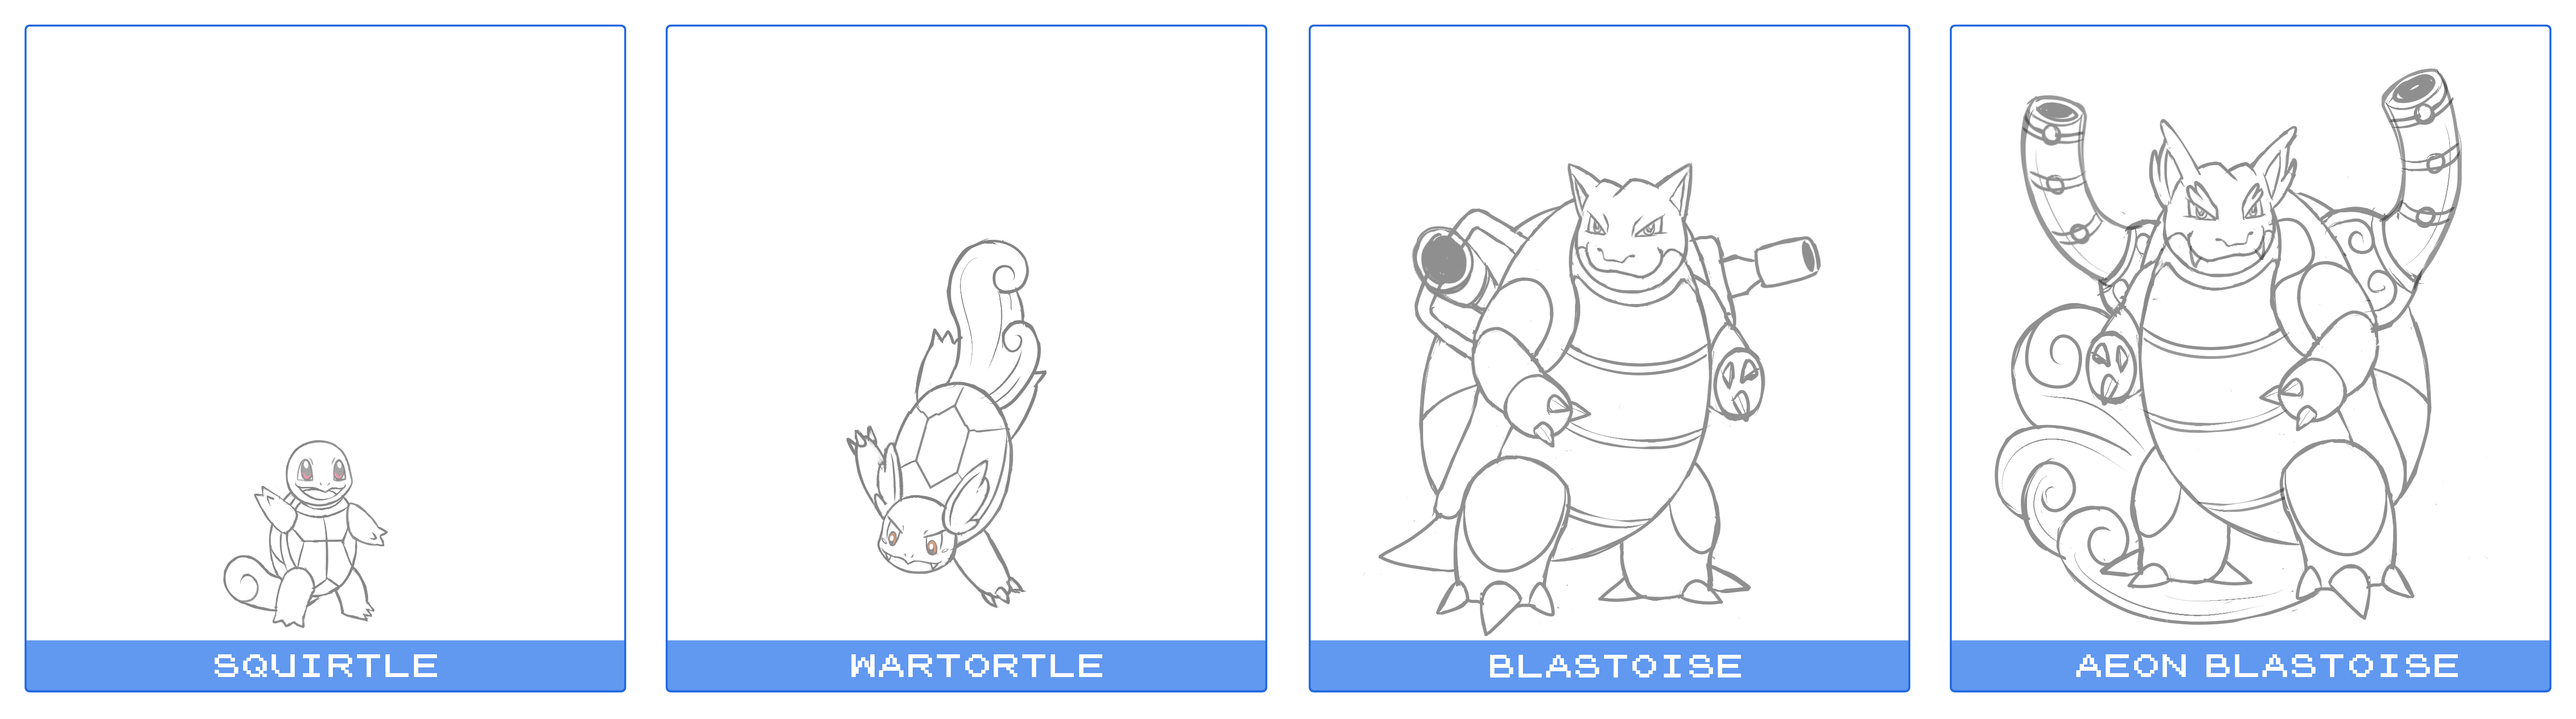 [ In Progress ] Squirtle Line.png